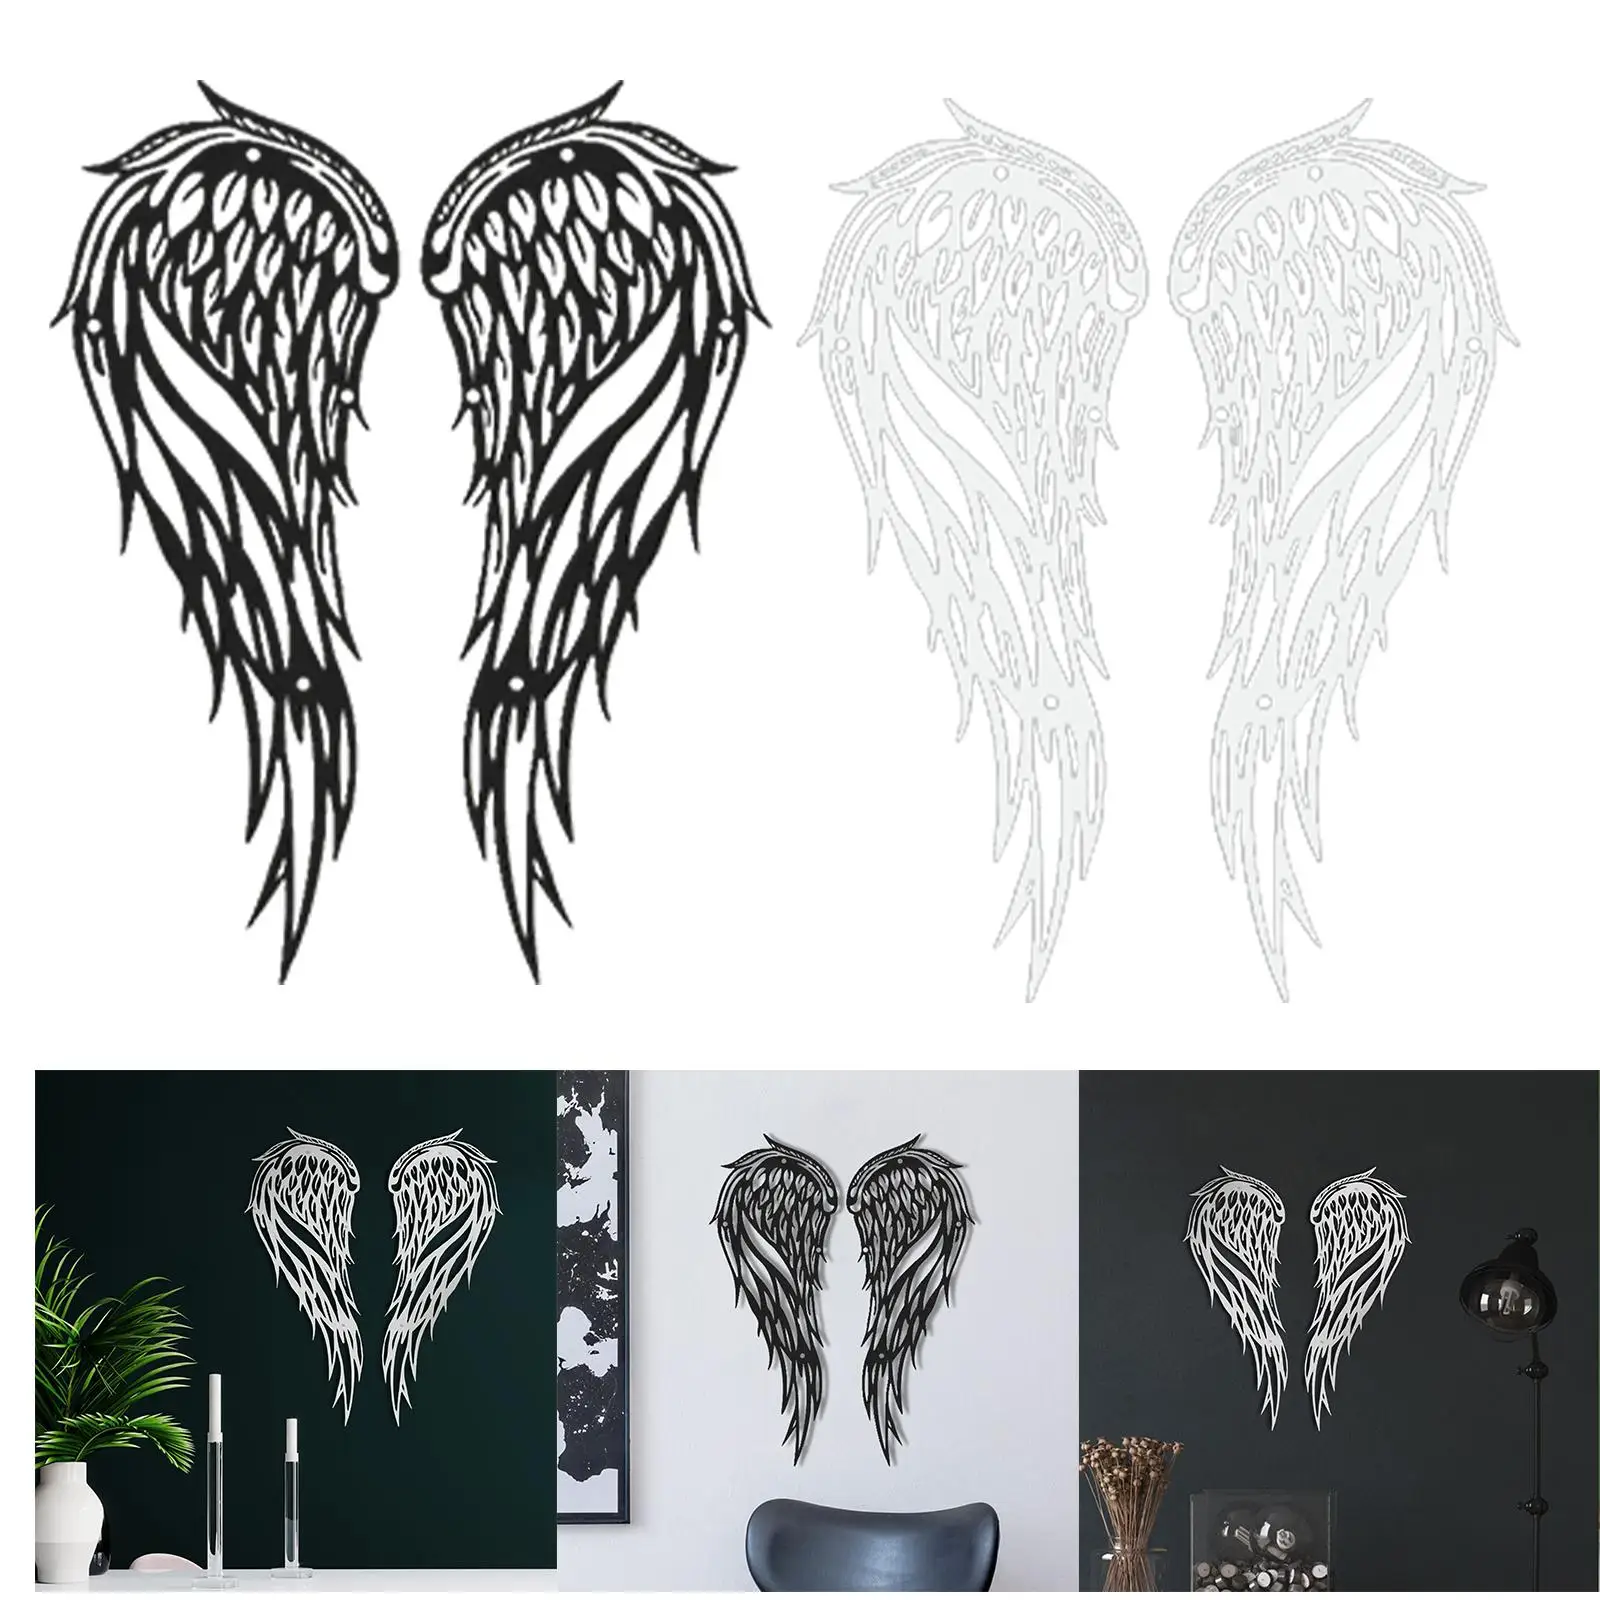 Rustic Pair of Angel Wing Crafts Retro Style Decorative Engraved Metal Wall Art Sculpture for Statue Indoor Outdoor Living Room